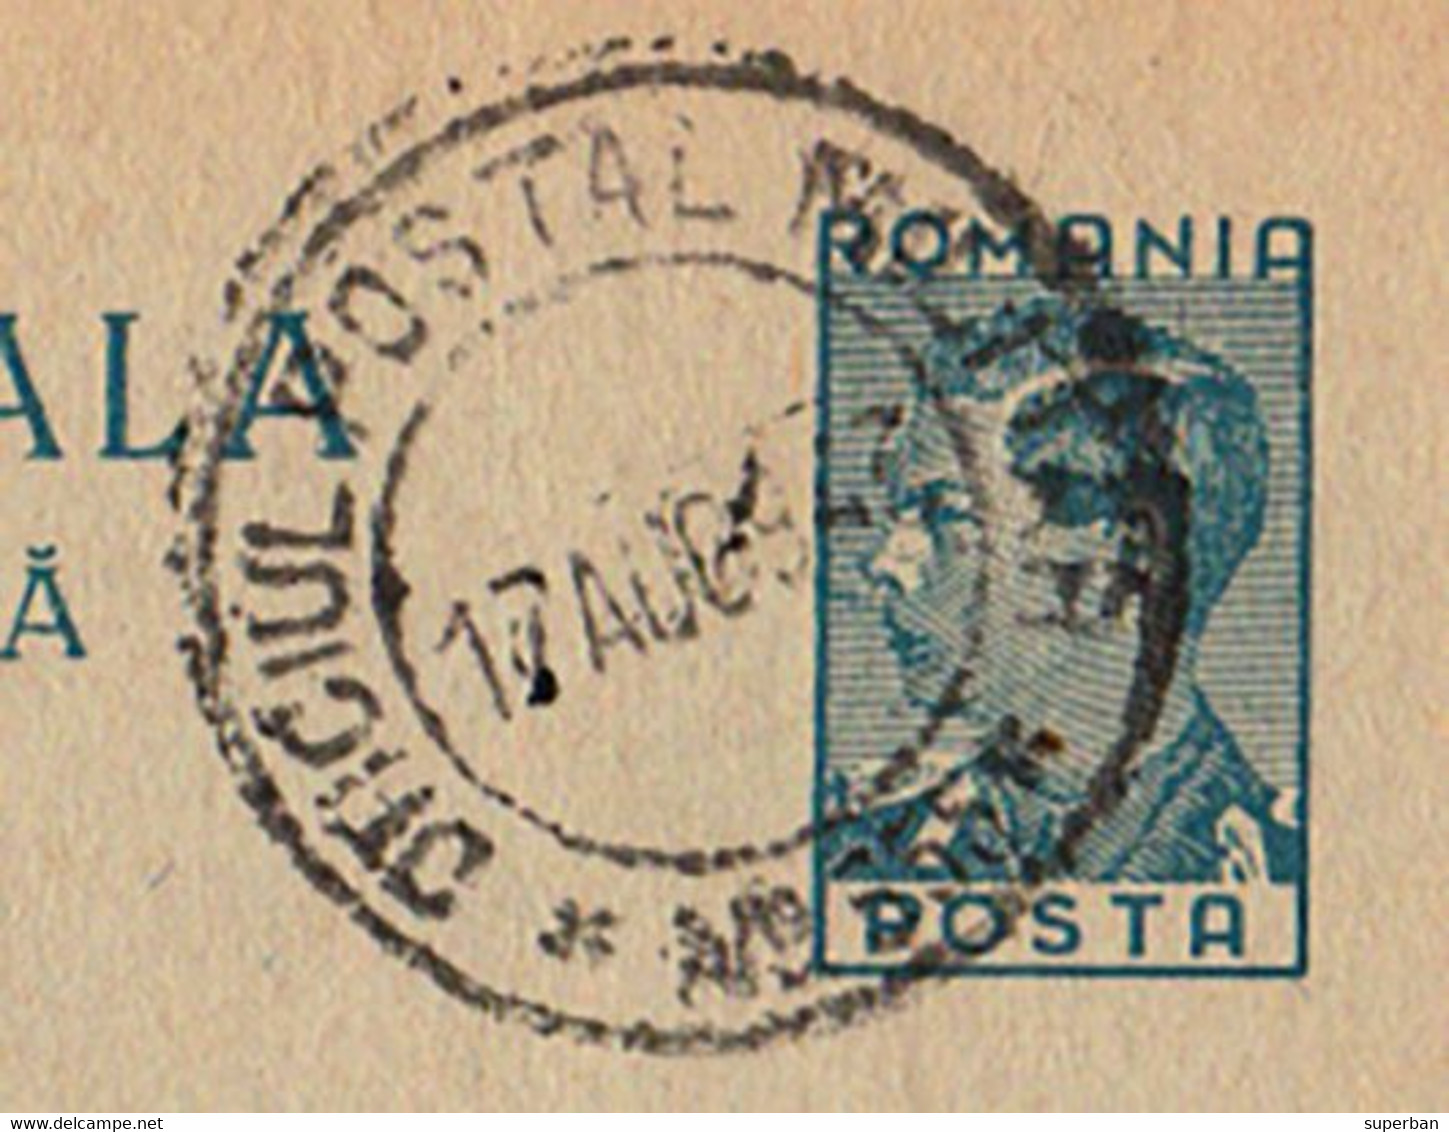 ROMANIA : CARTE ENTIER POSTAL / STATIONERY POSTCARD - MAILED By MILITARY POST : O. P. M. Nr. 555 - 1943 (ak914) - Lettres 2ème Guerre Mondiale